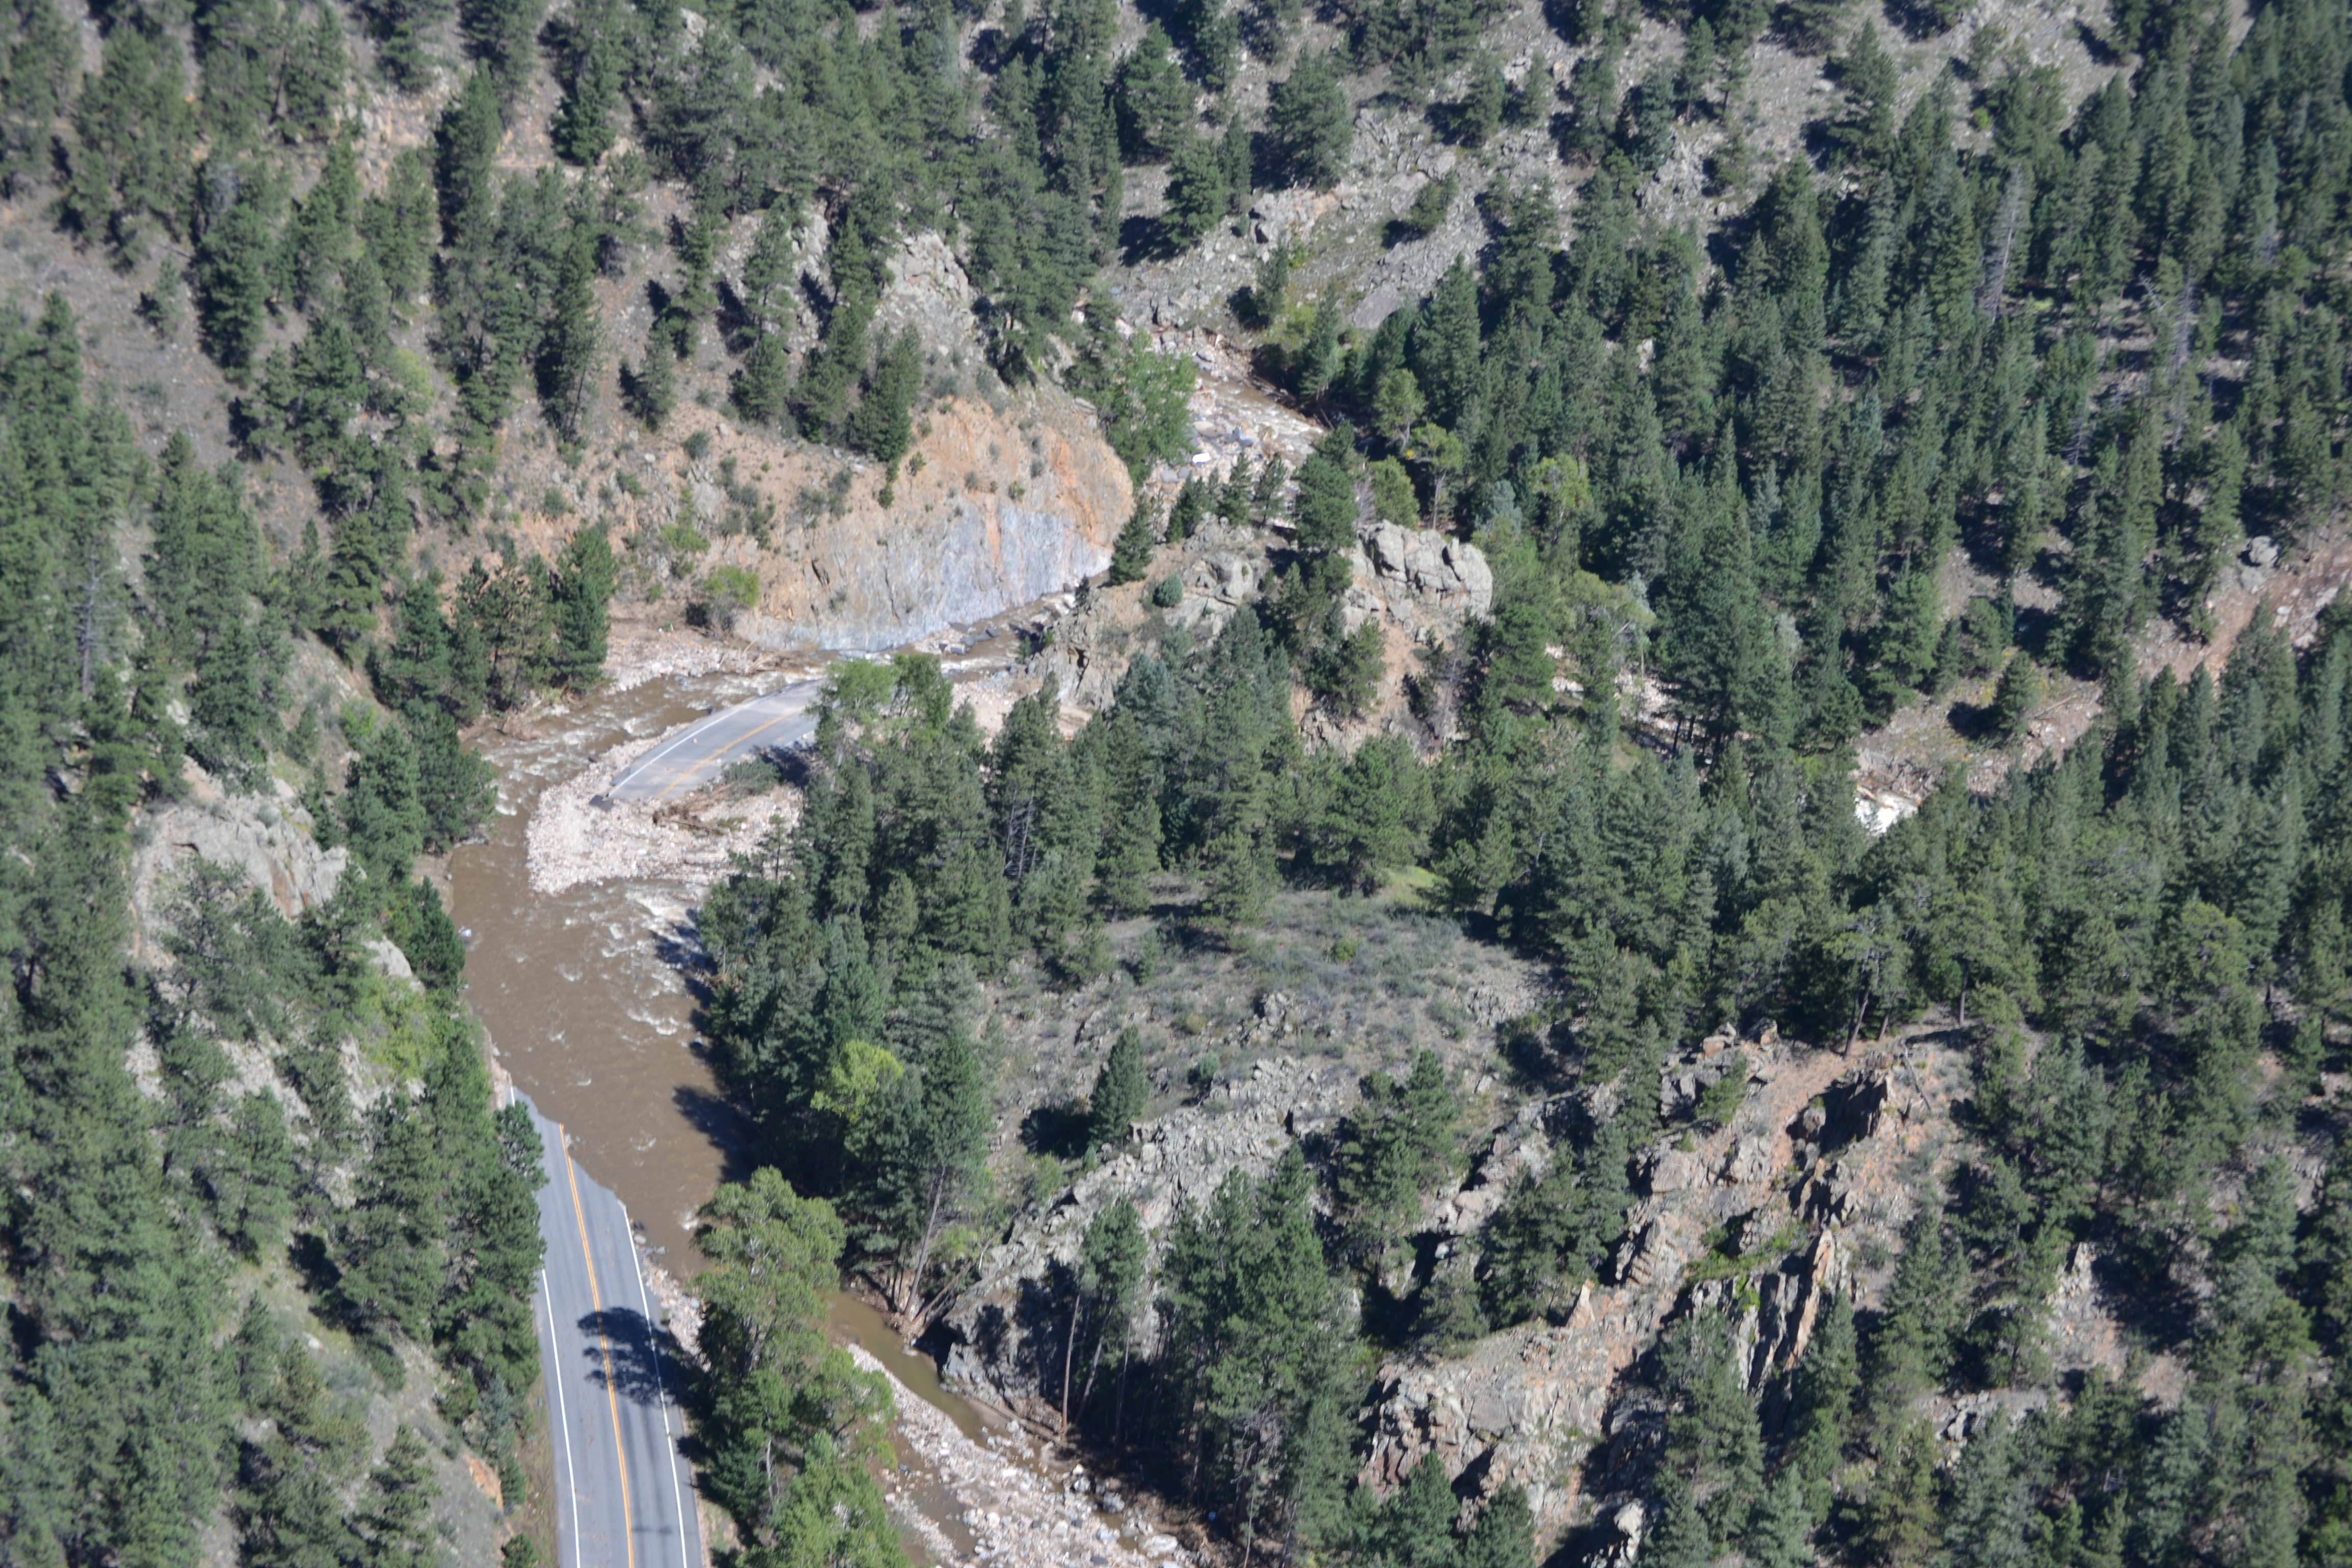 Flood damages James Canyon sustained during the 2013 event